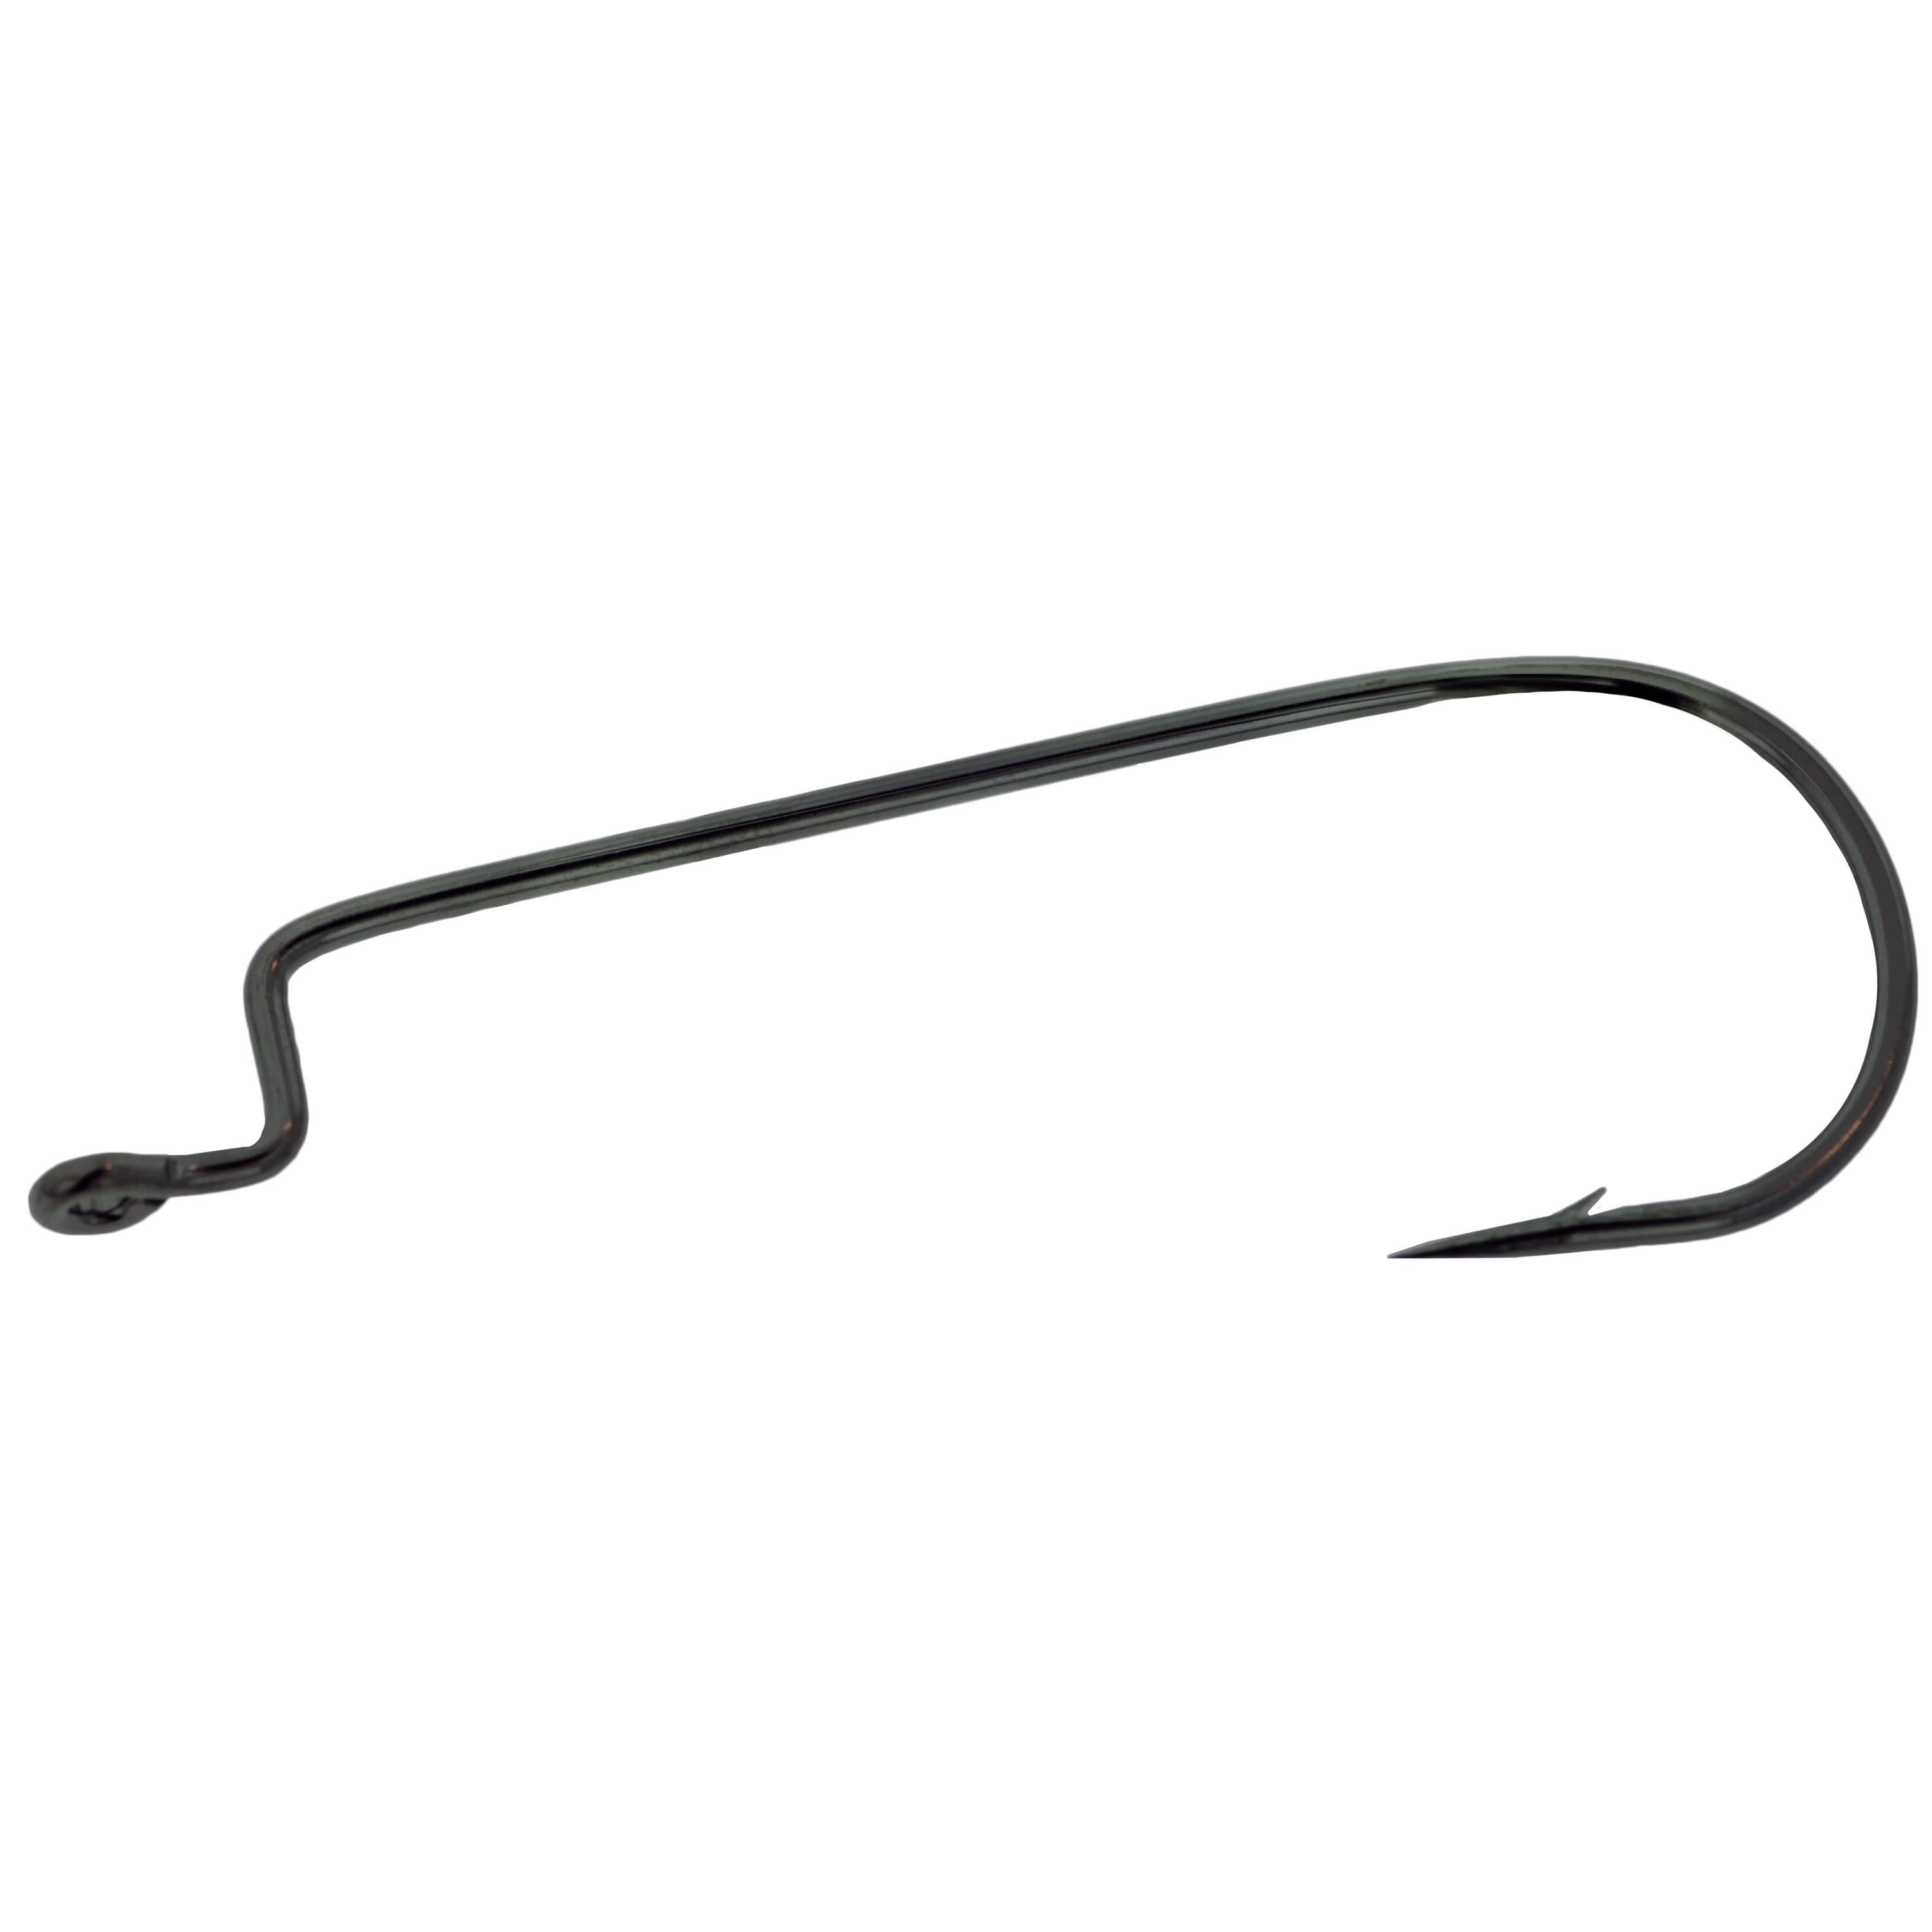 Lazer Sharp Round Bend Worm Hook  Up to 31% Off Free Shipping over $49!